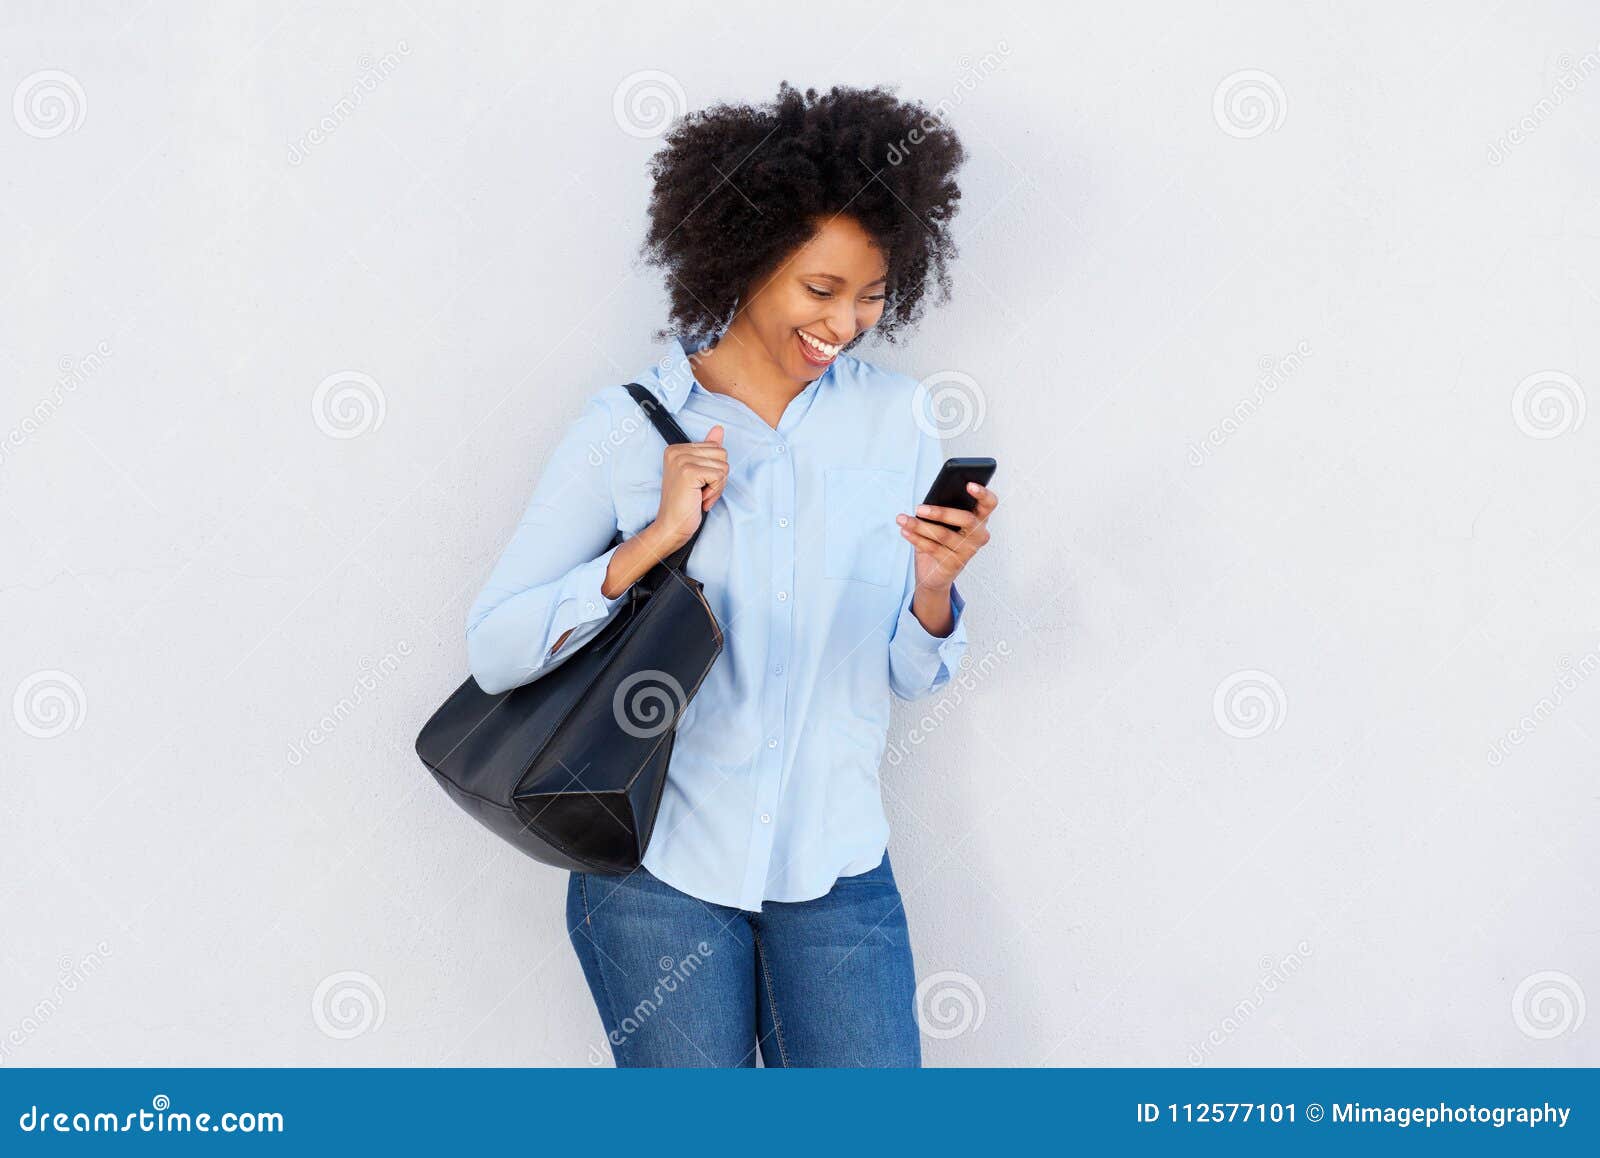 beautiful black woman with purse looking at cellphone and laughing